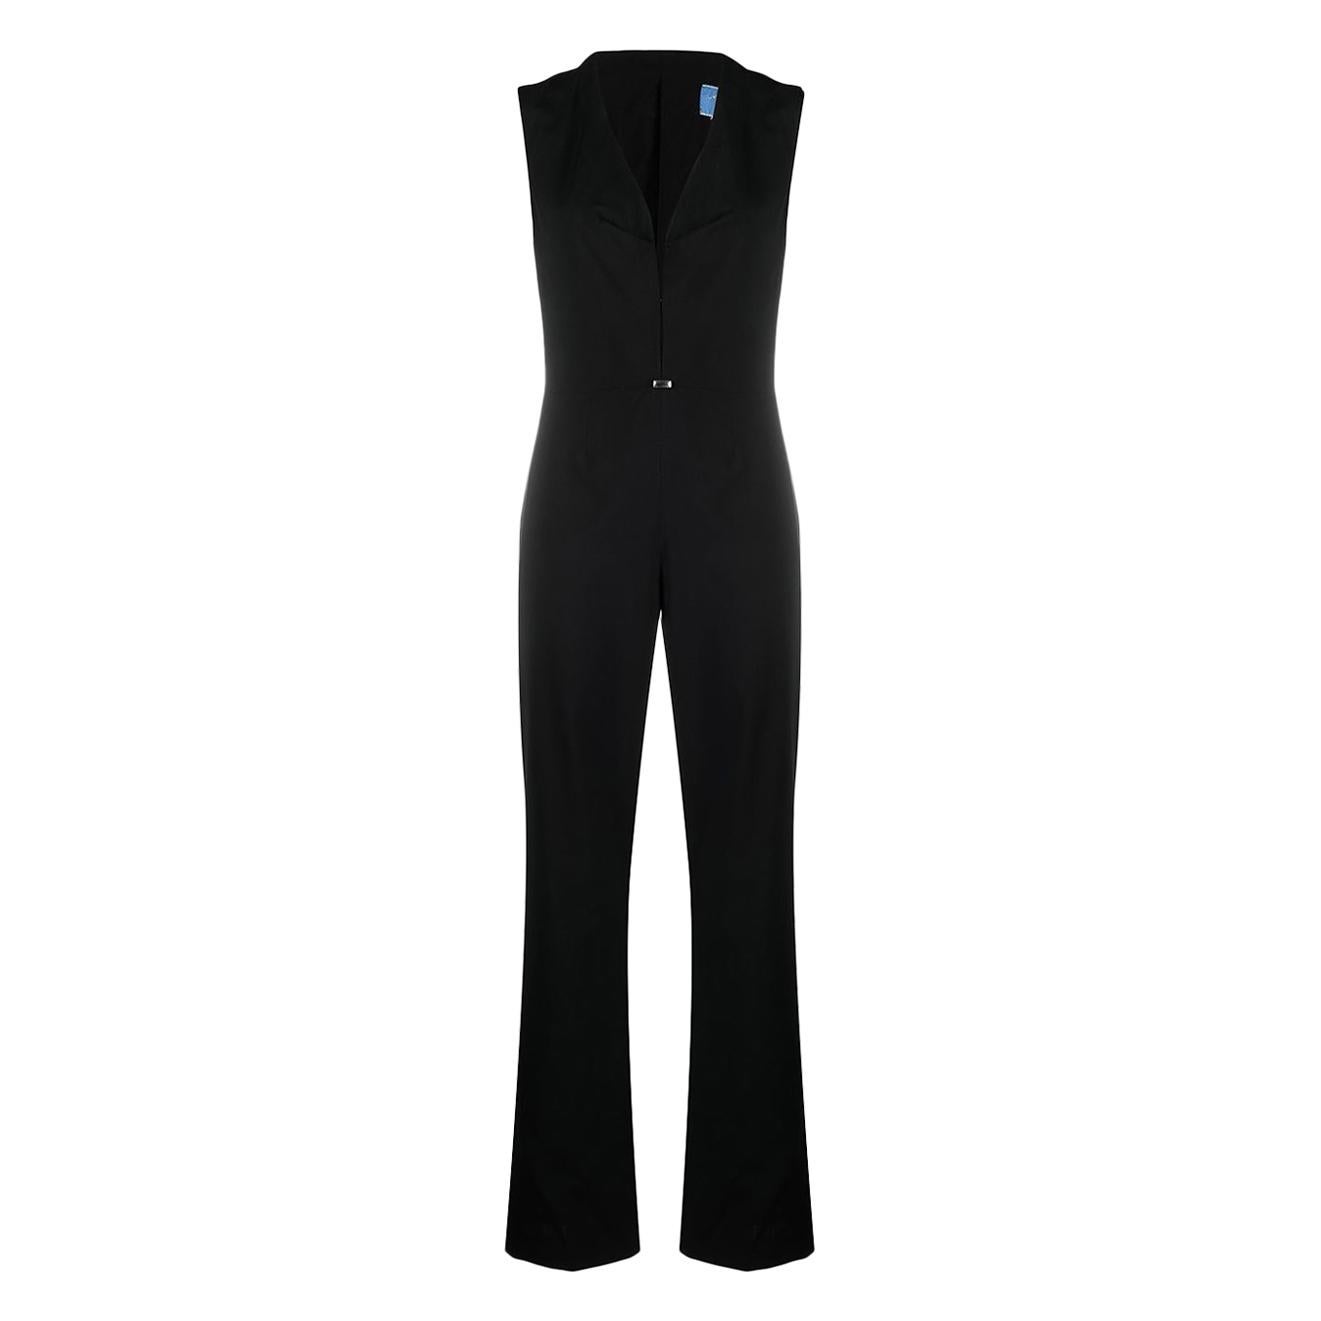 Thierry Mugler Couture Iconic Black Jumpsuit